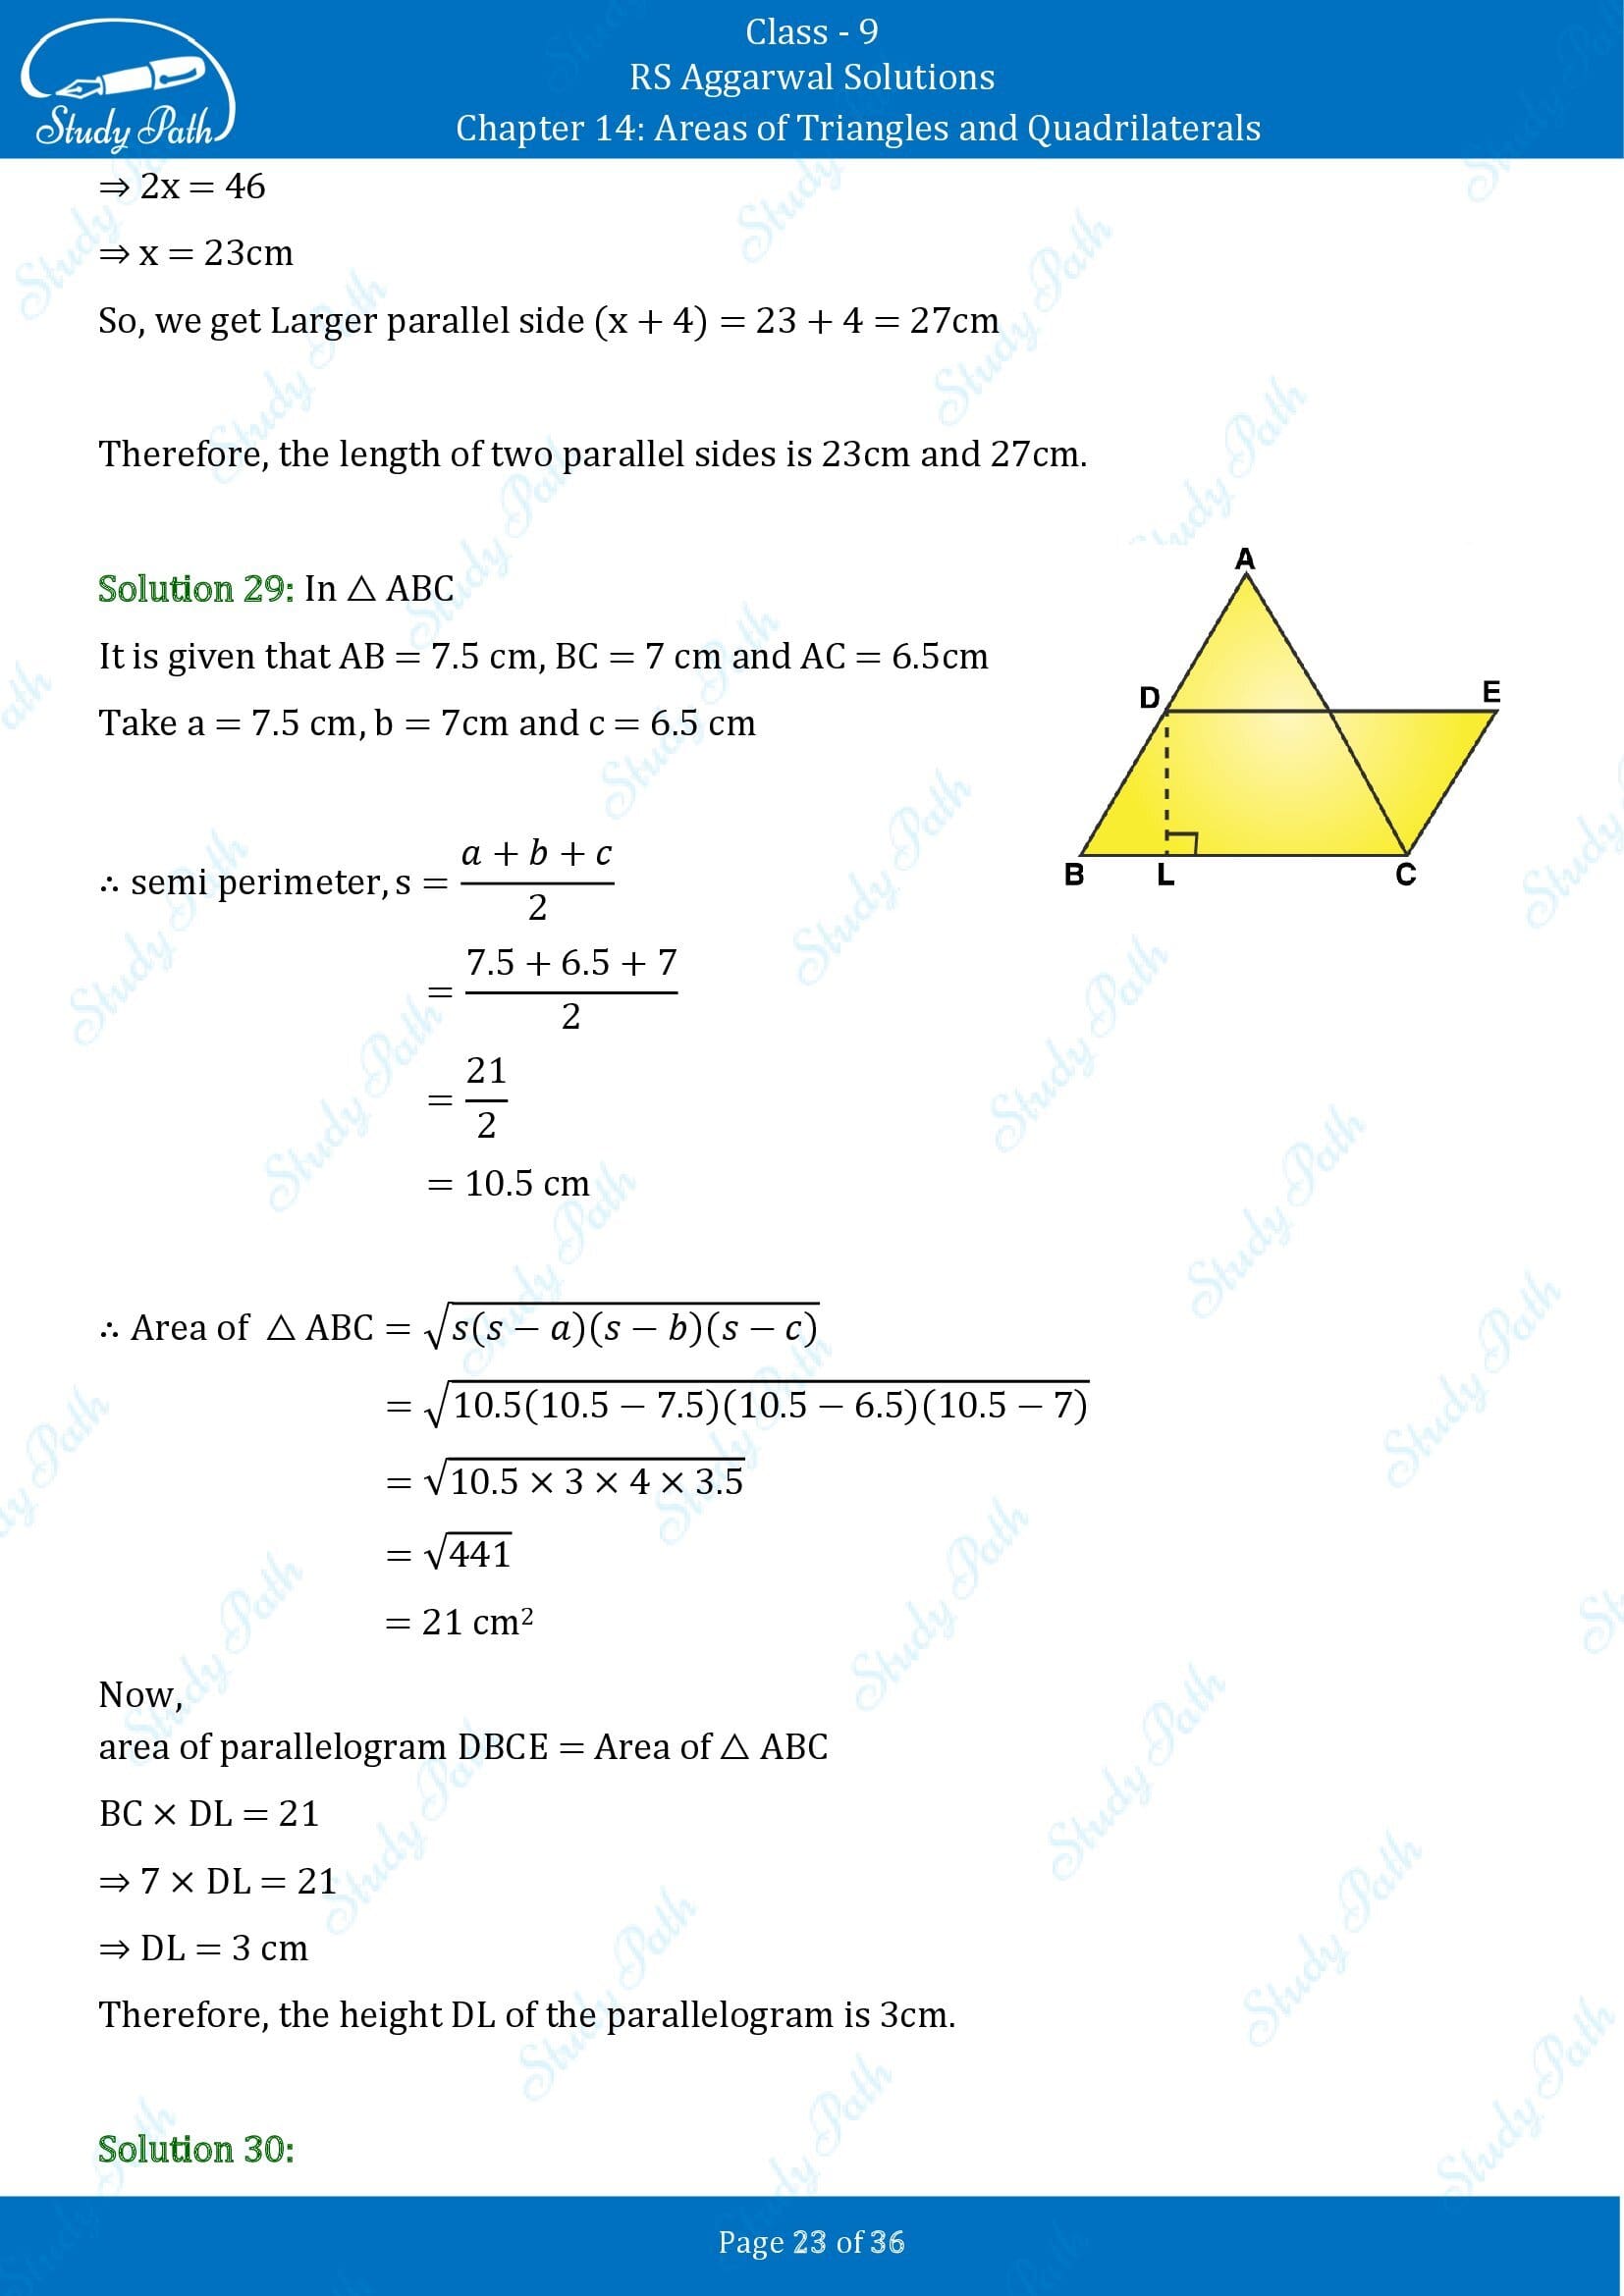 RS Aggarwal Solutions Class 9 Chapter 14 Areas of Triangles and Quadrilaterals Exercise 14 00023